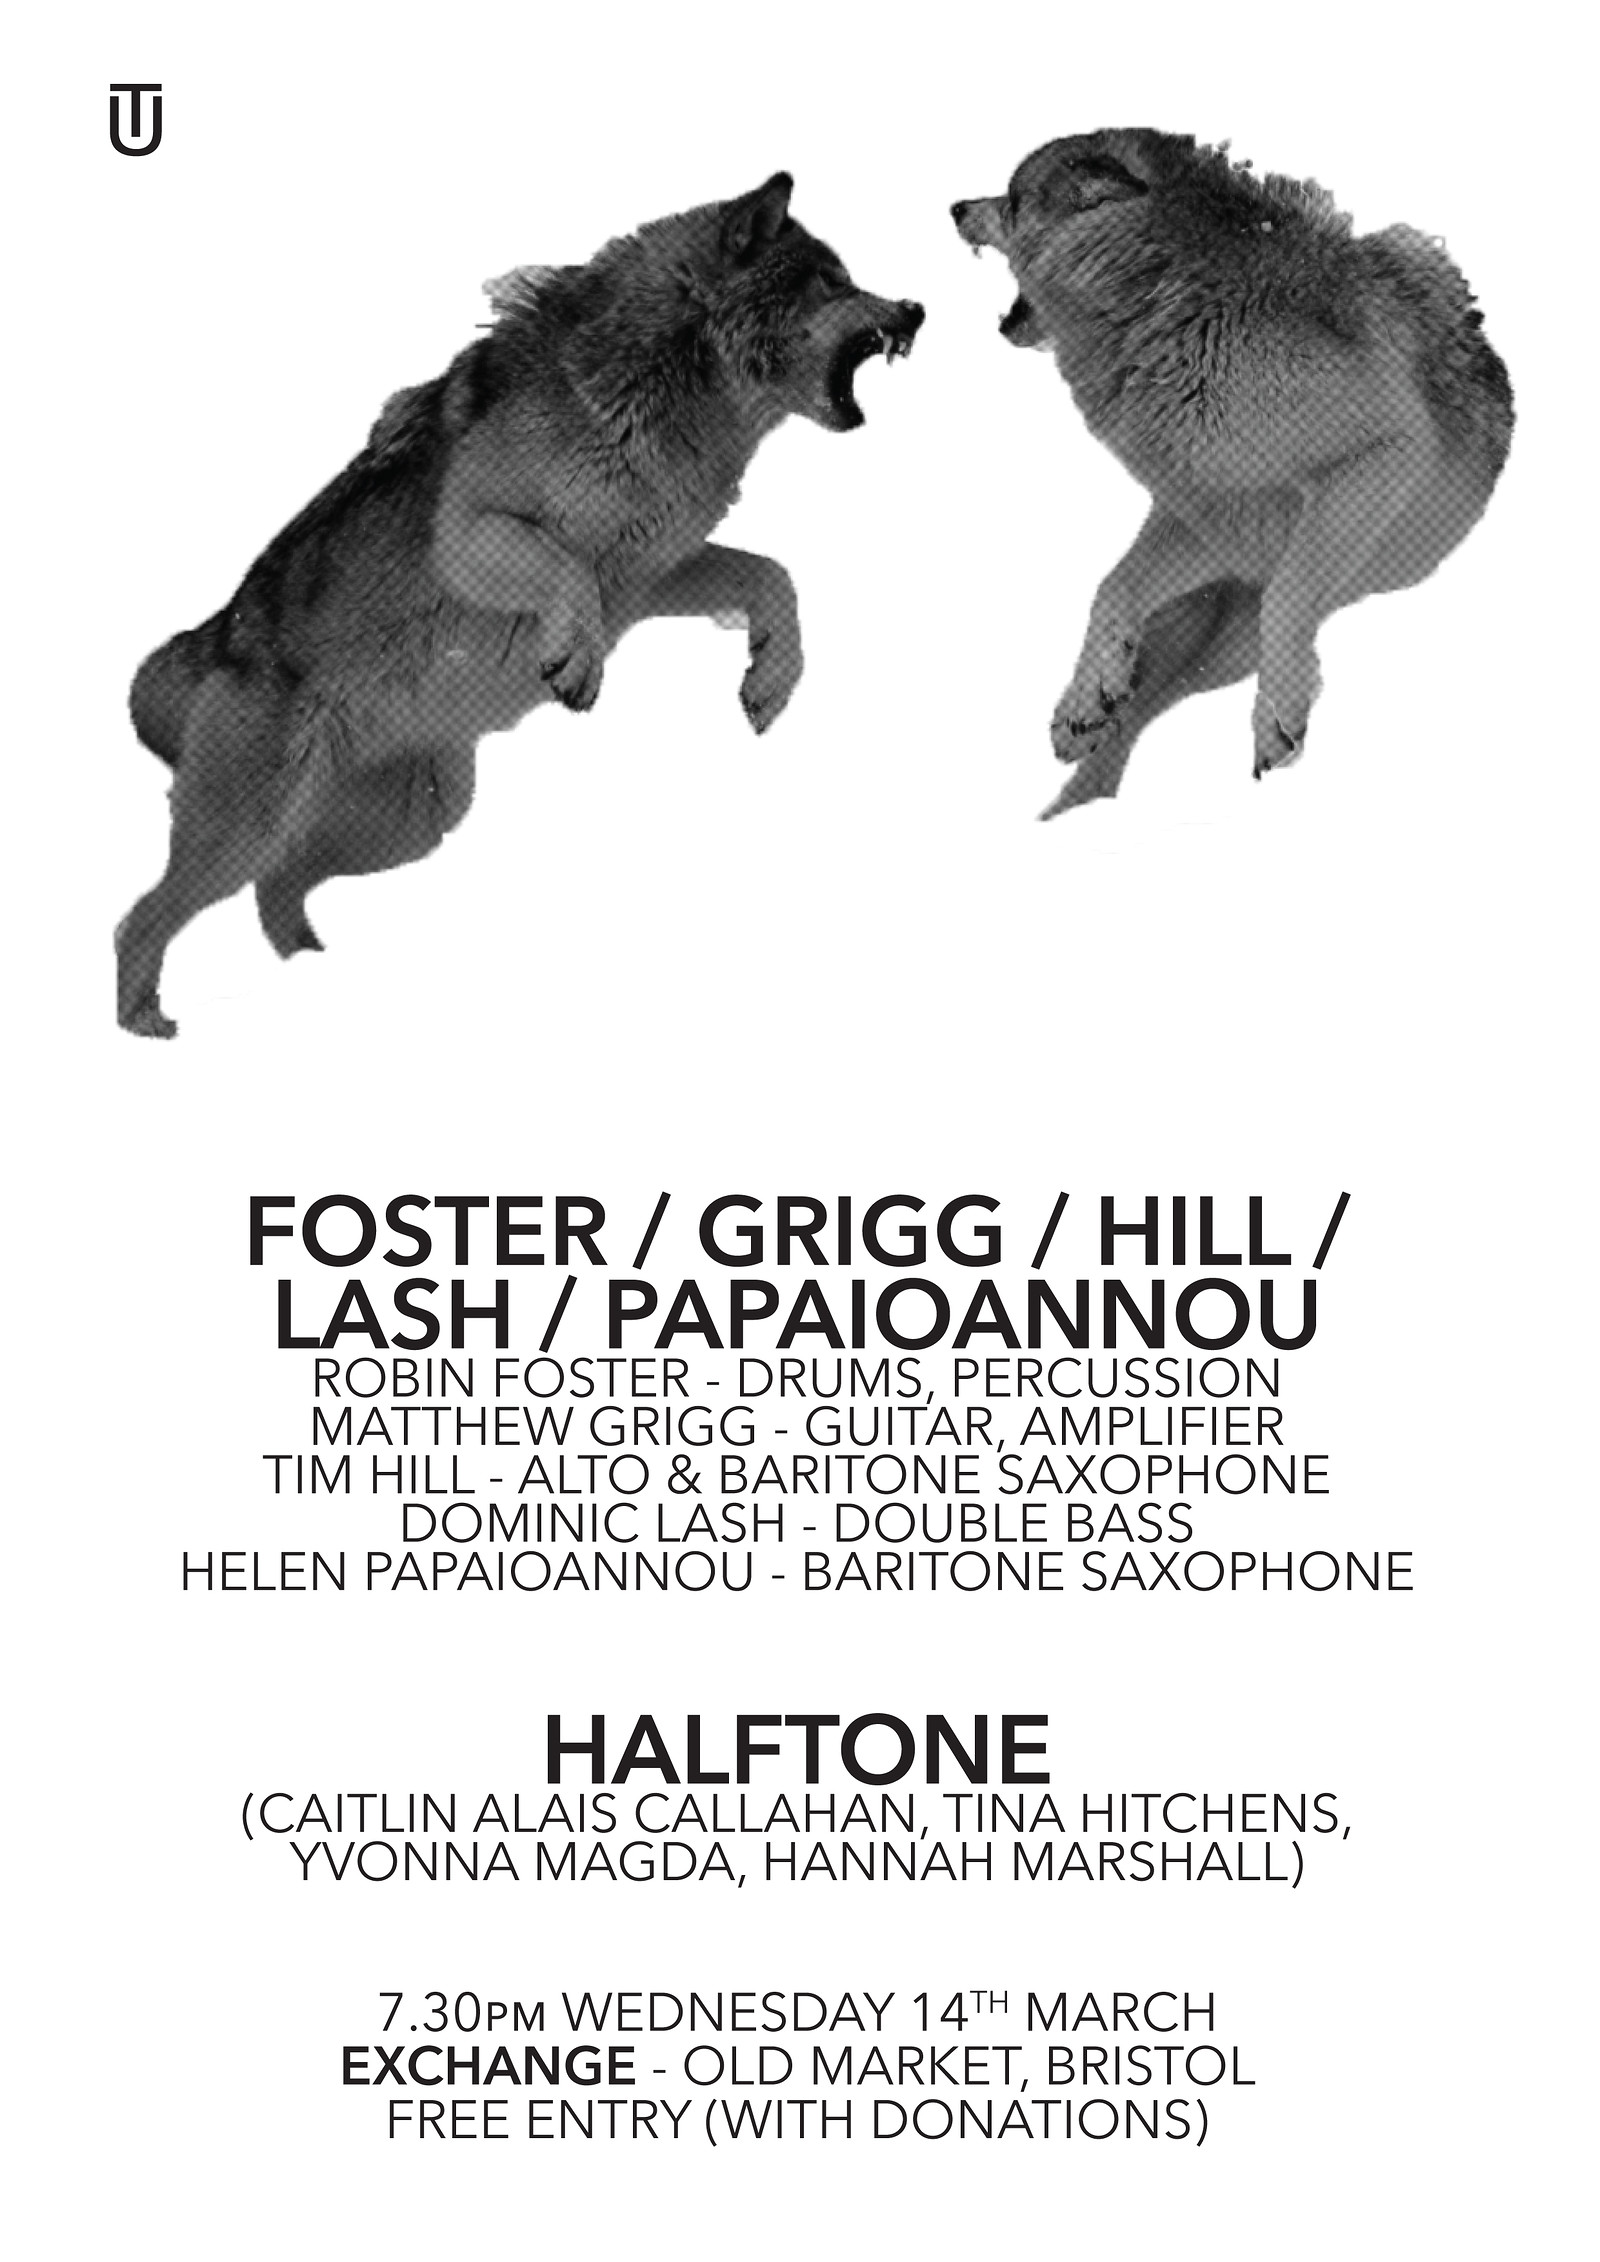 Foster/ Grigg/ Hill/ Lash/ Papaioannou & Halftone at Exchange